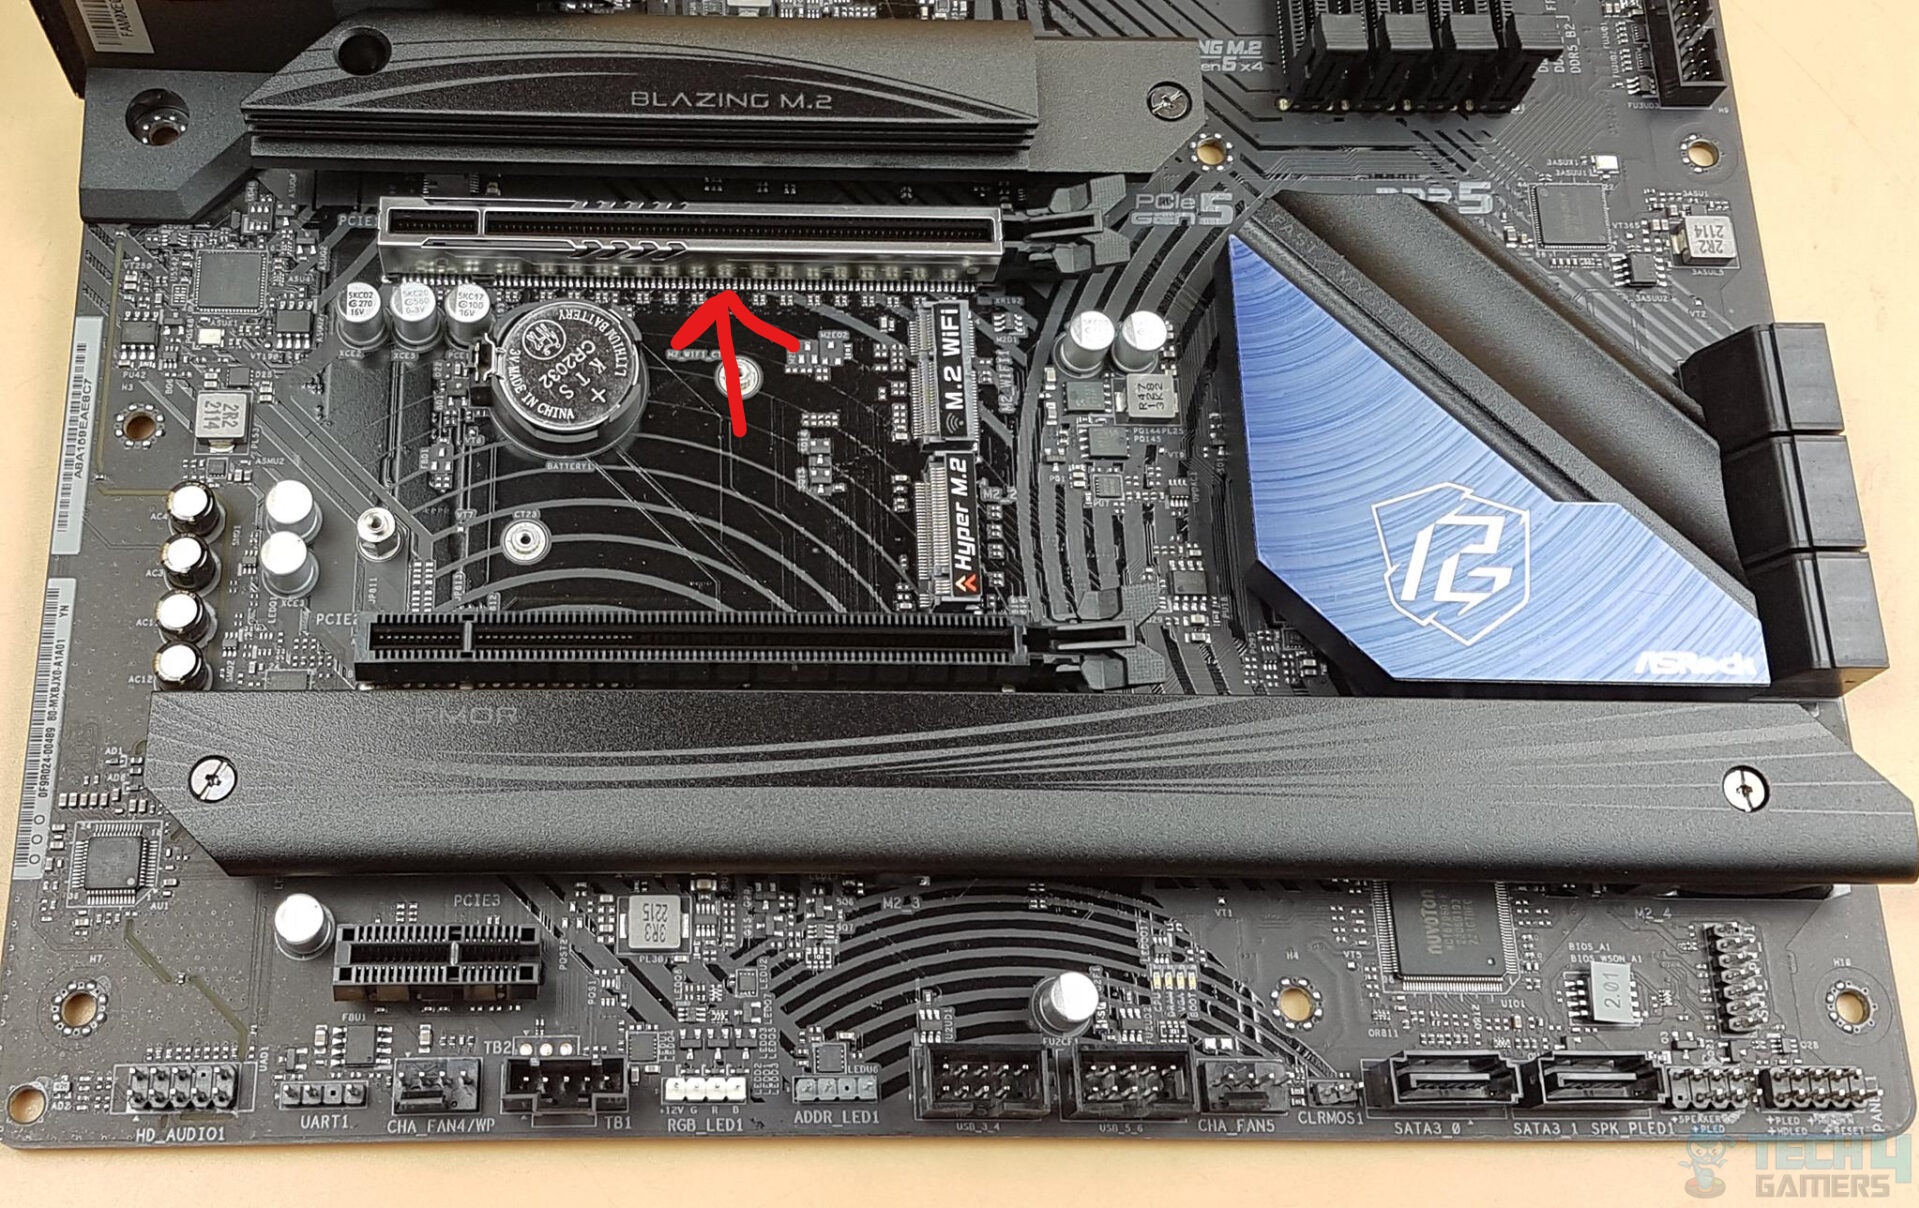 PCIe x16 Slot (Image By Tech4Gamers)